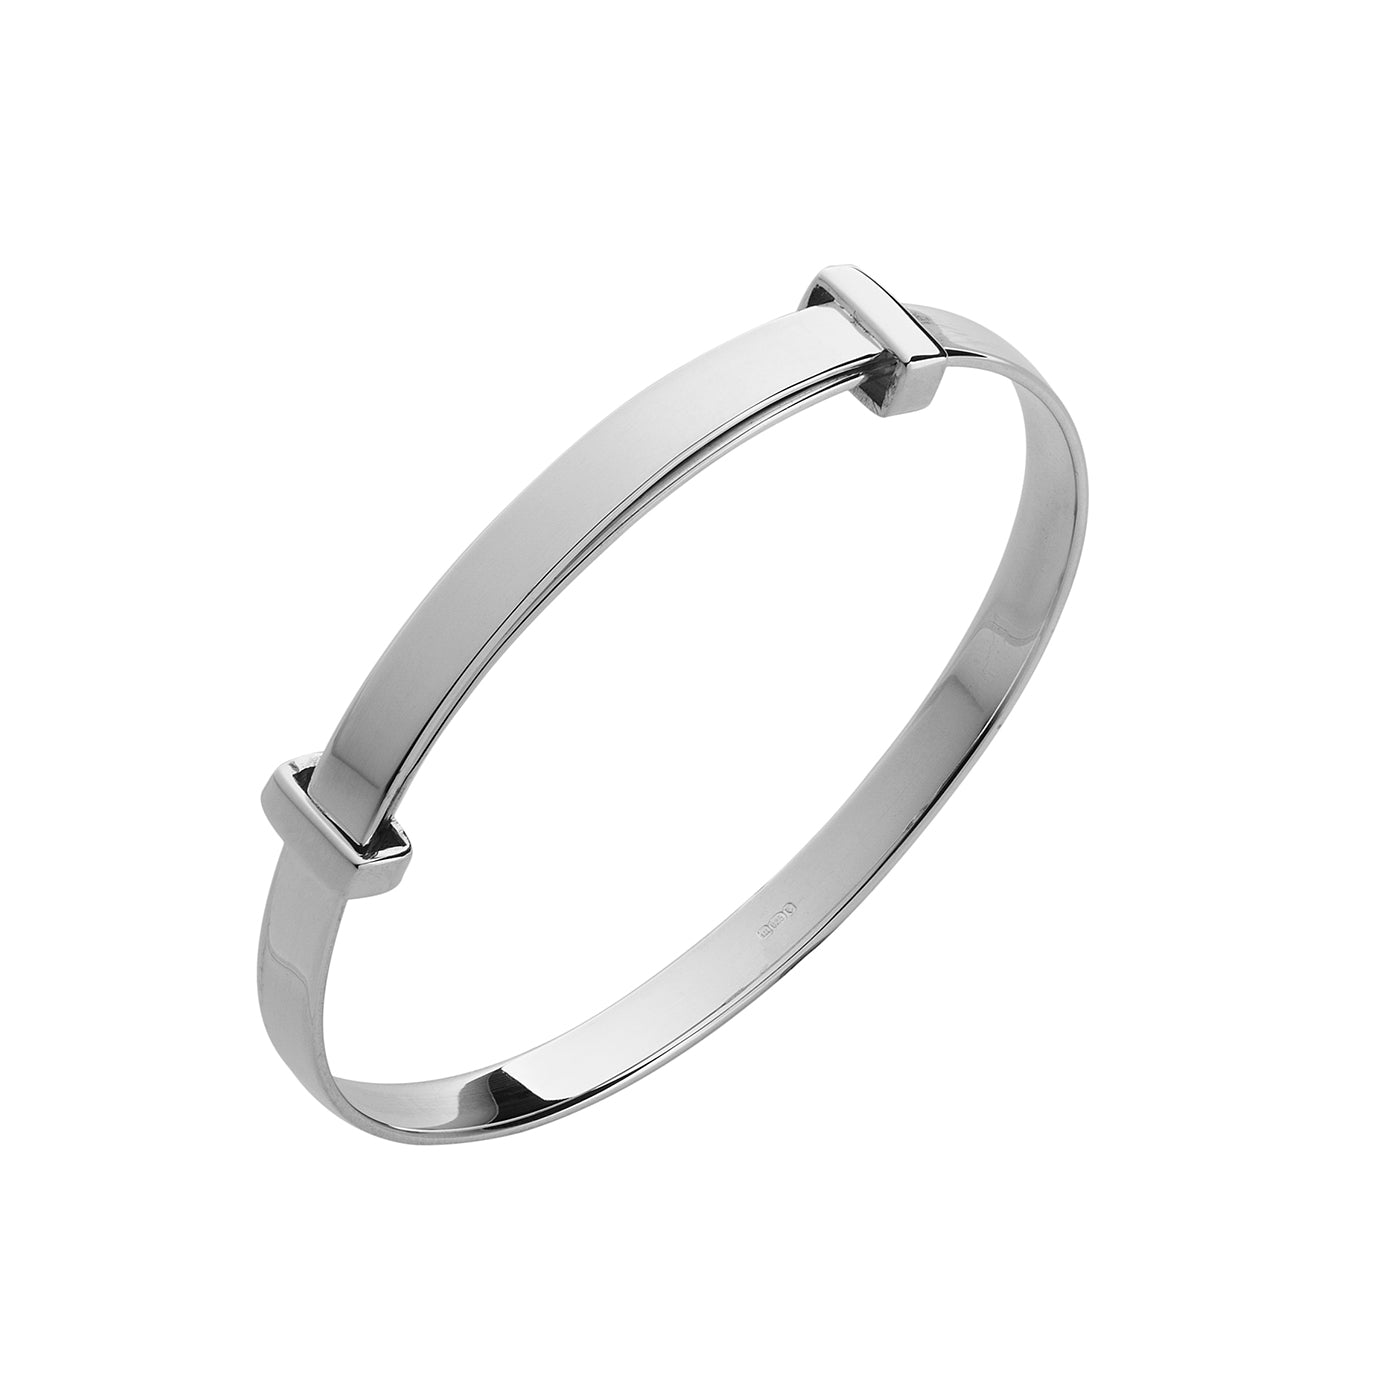 Childs Silver Expanding Bangle